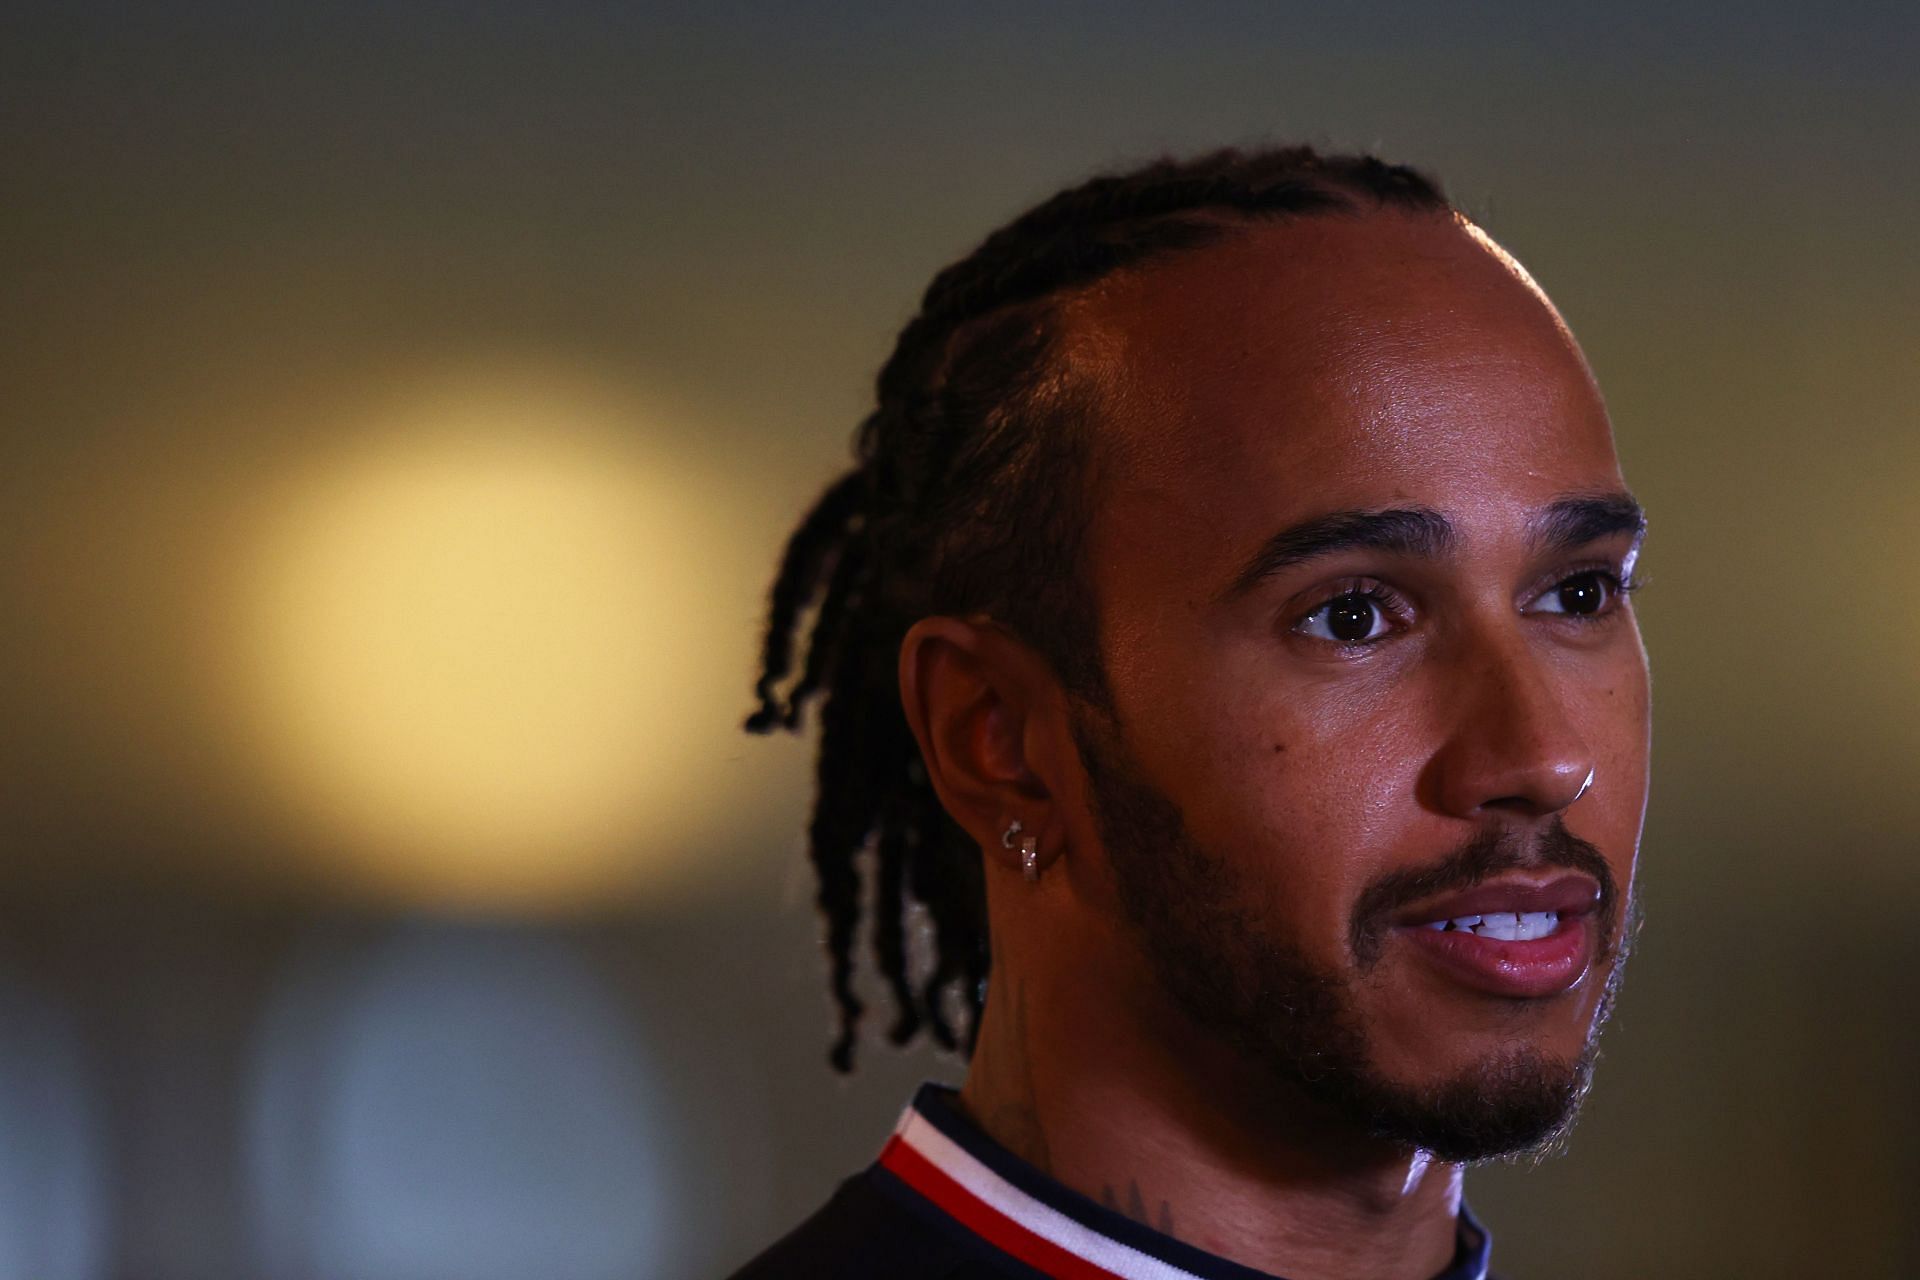 Lewis Hamilton talks to the media in the Paddock during previews ahead 2021 Abu Dhabi GP. (Photo by Bryn Lennon/Getty Images)